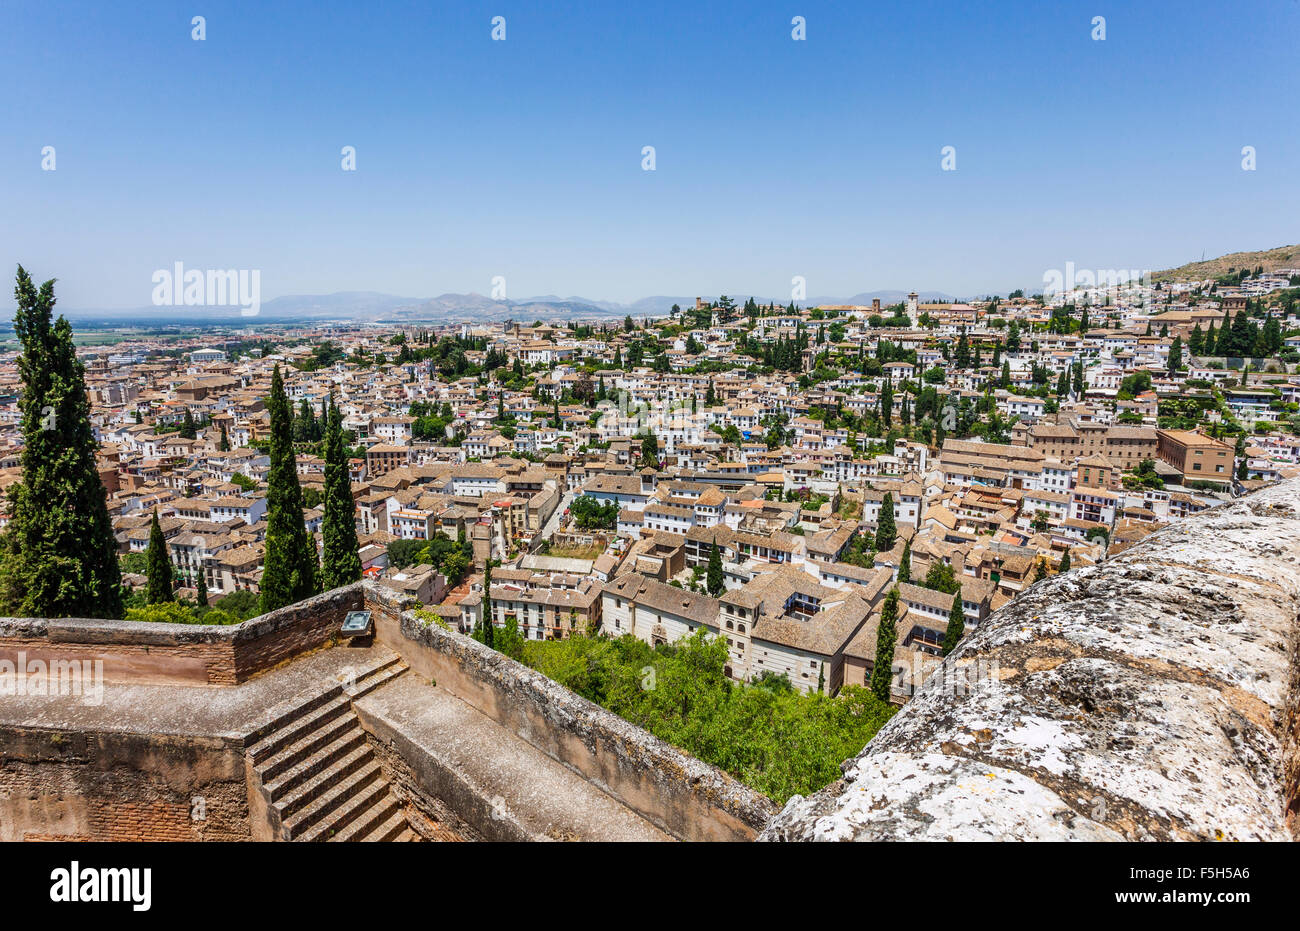 Spain, Andalusia, Province of Granada, view of Granada from the battlements of the Alcazaba at the Alhambra de Granada Stock Photo